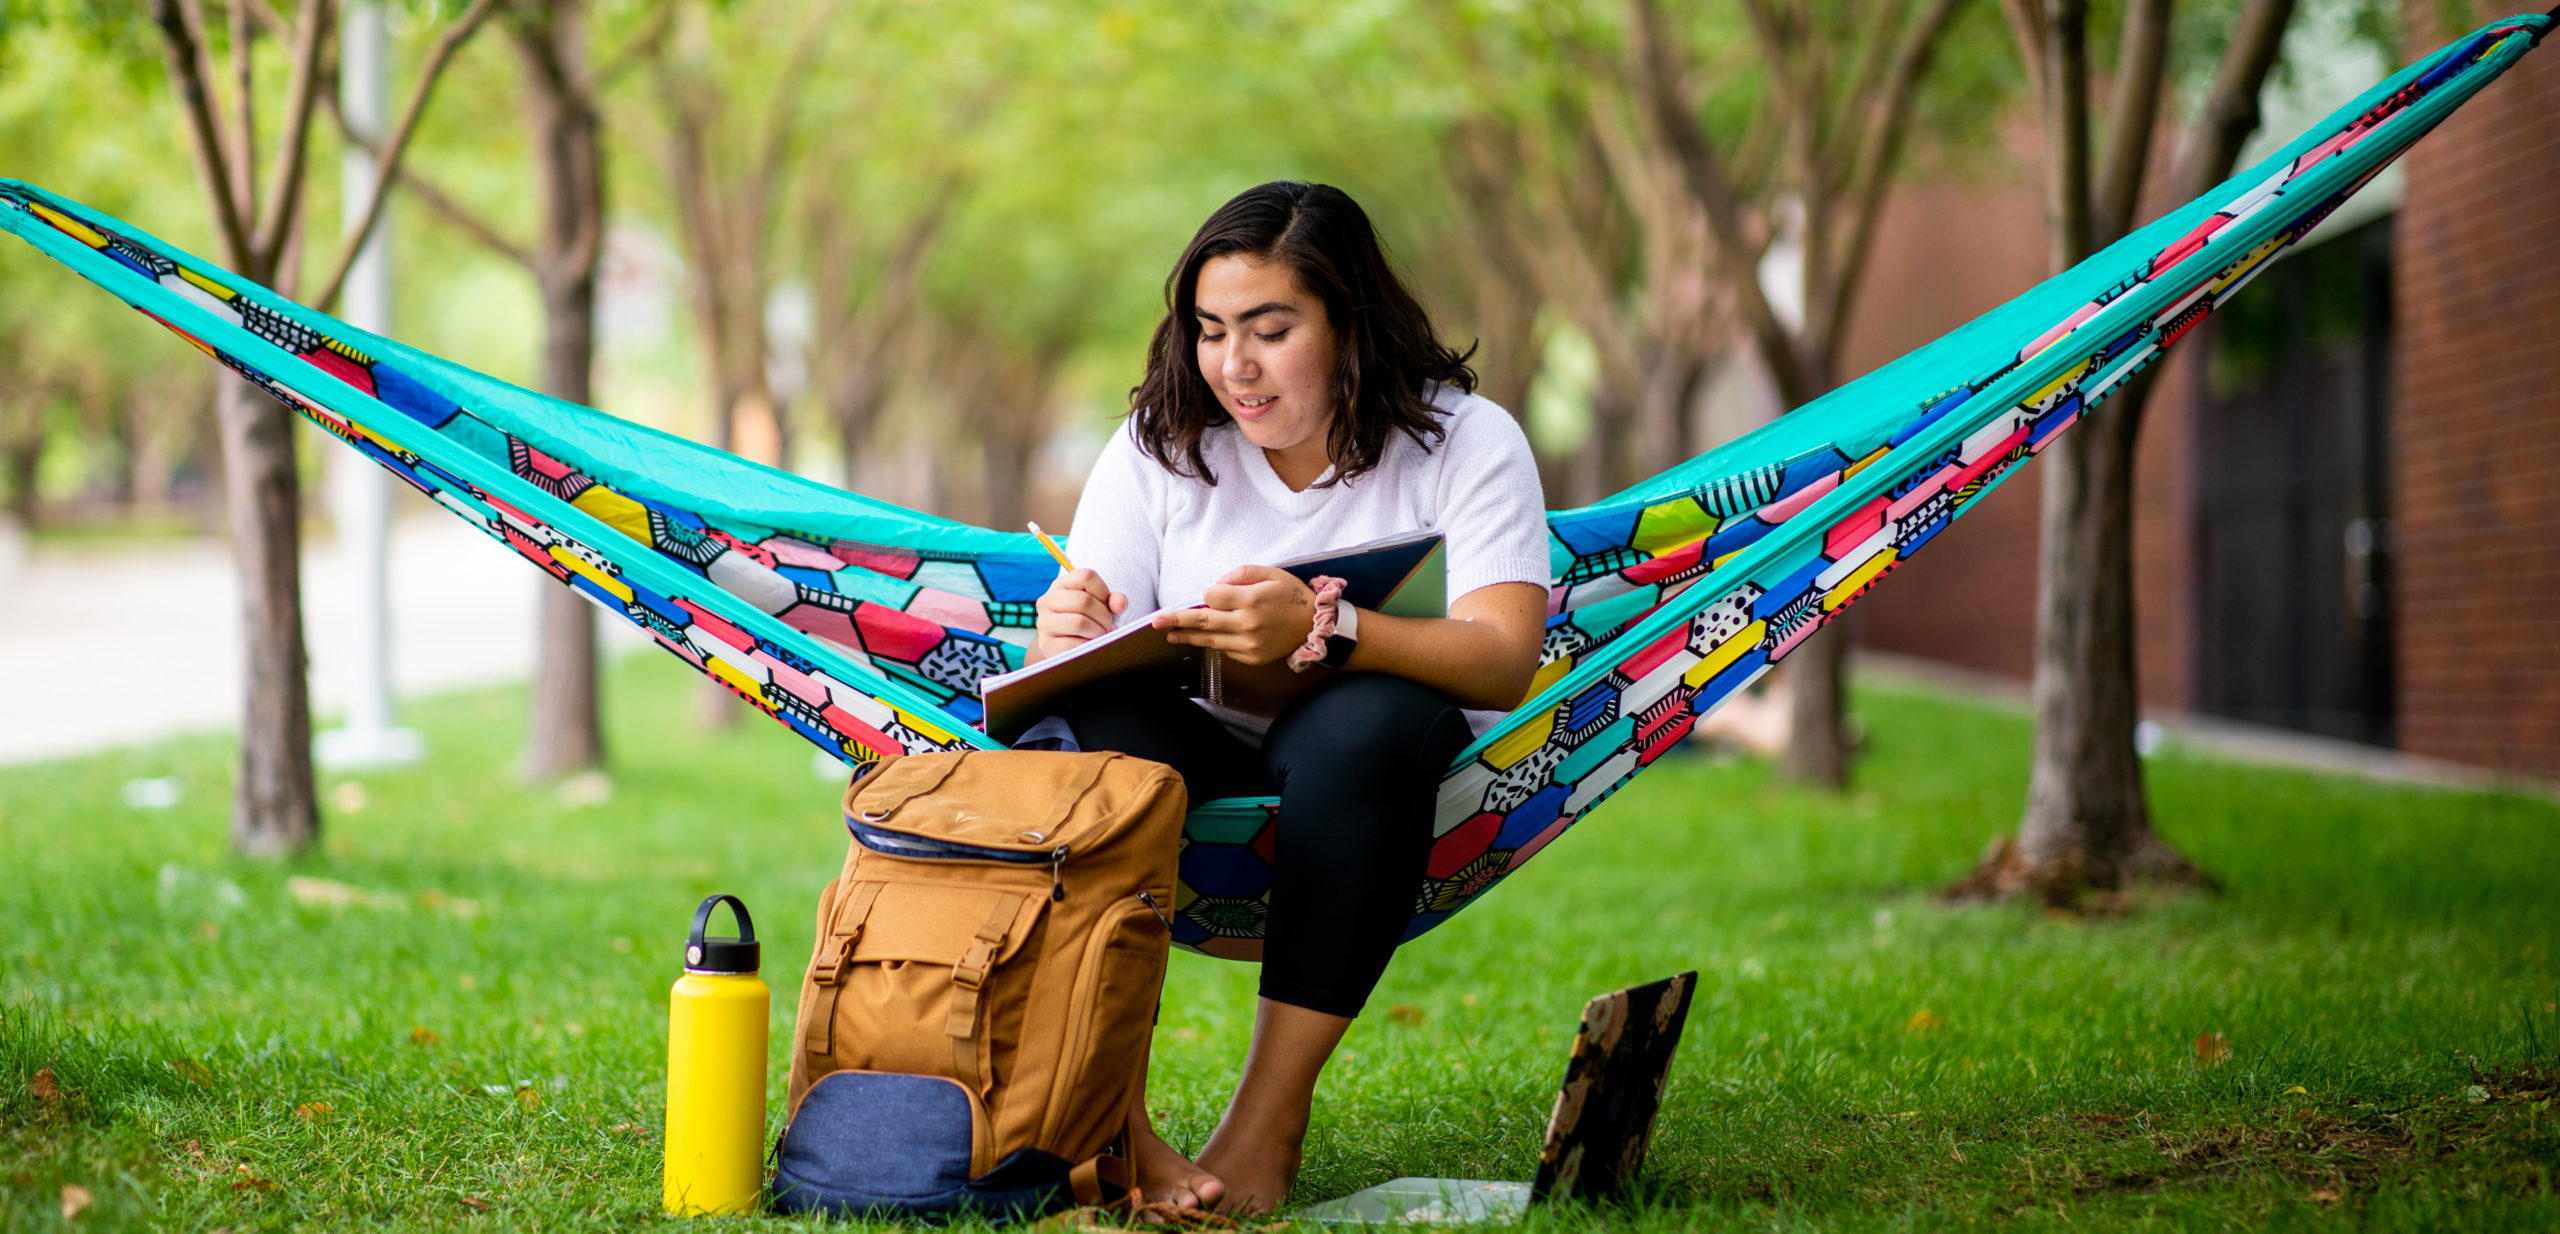 Student studying on campus